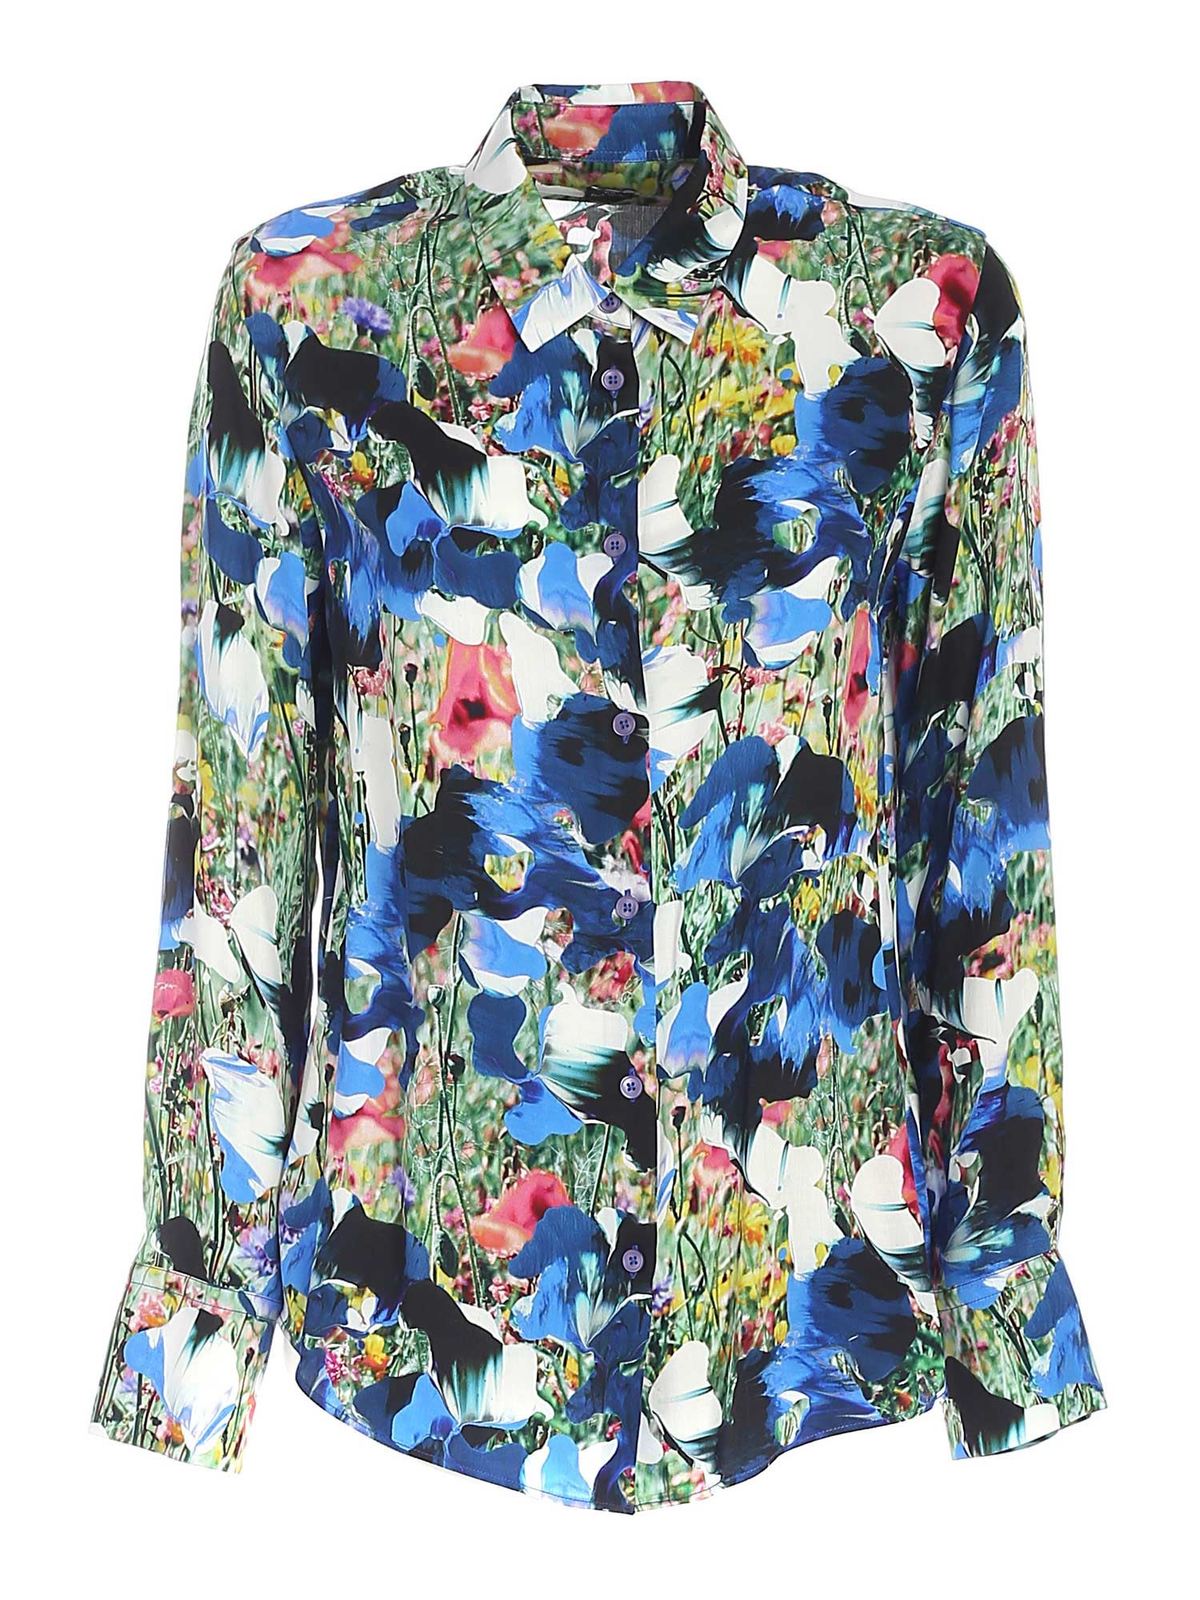 Floral print shirt in multicolor